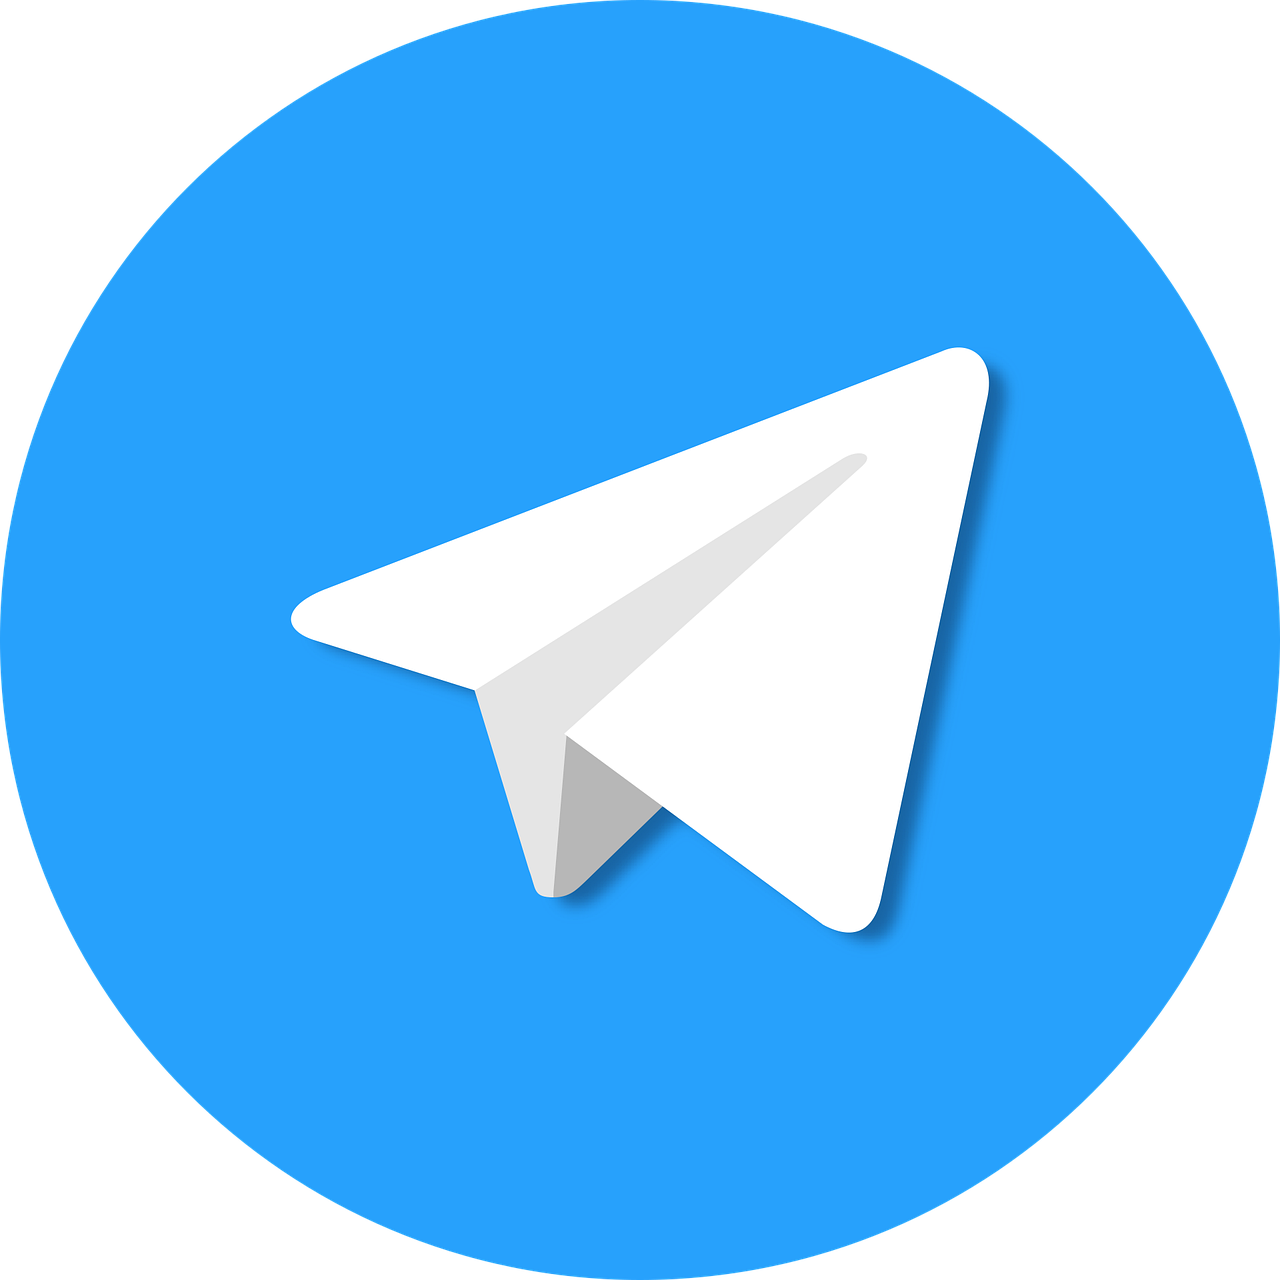 5 Telegram features you might not have known